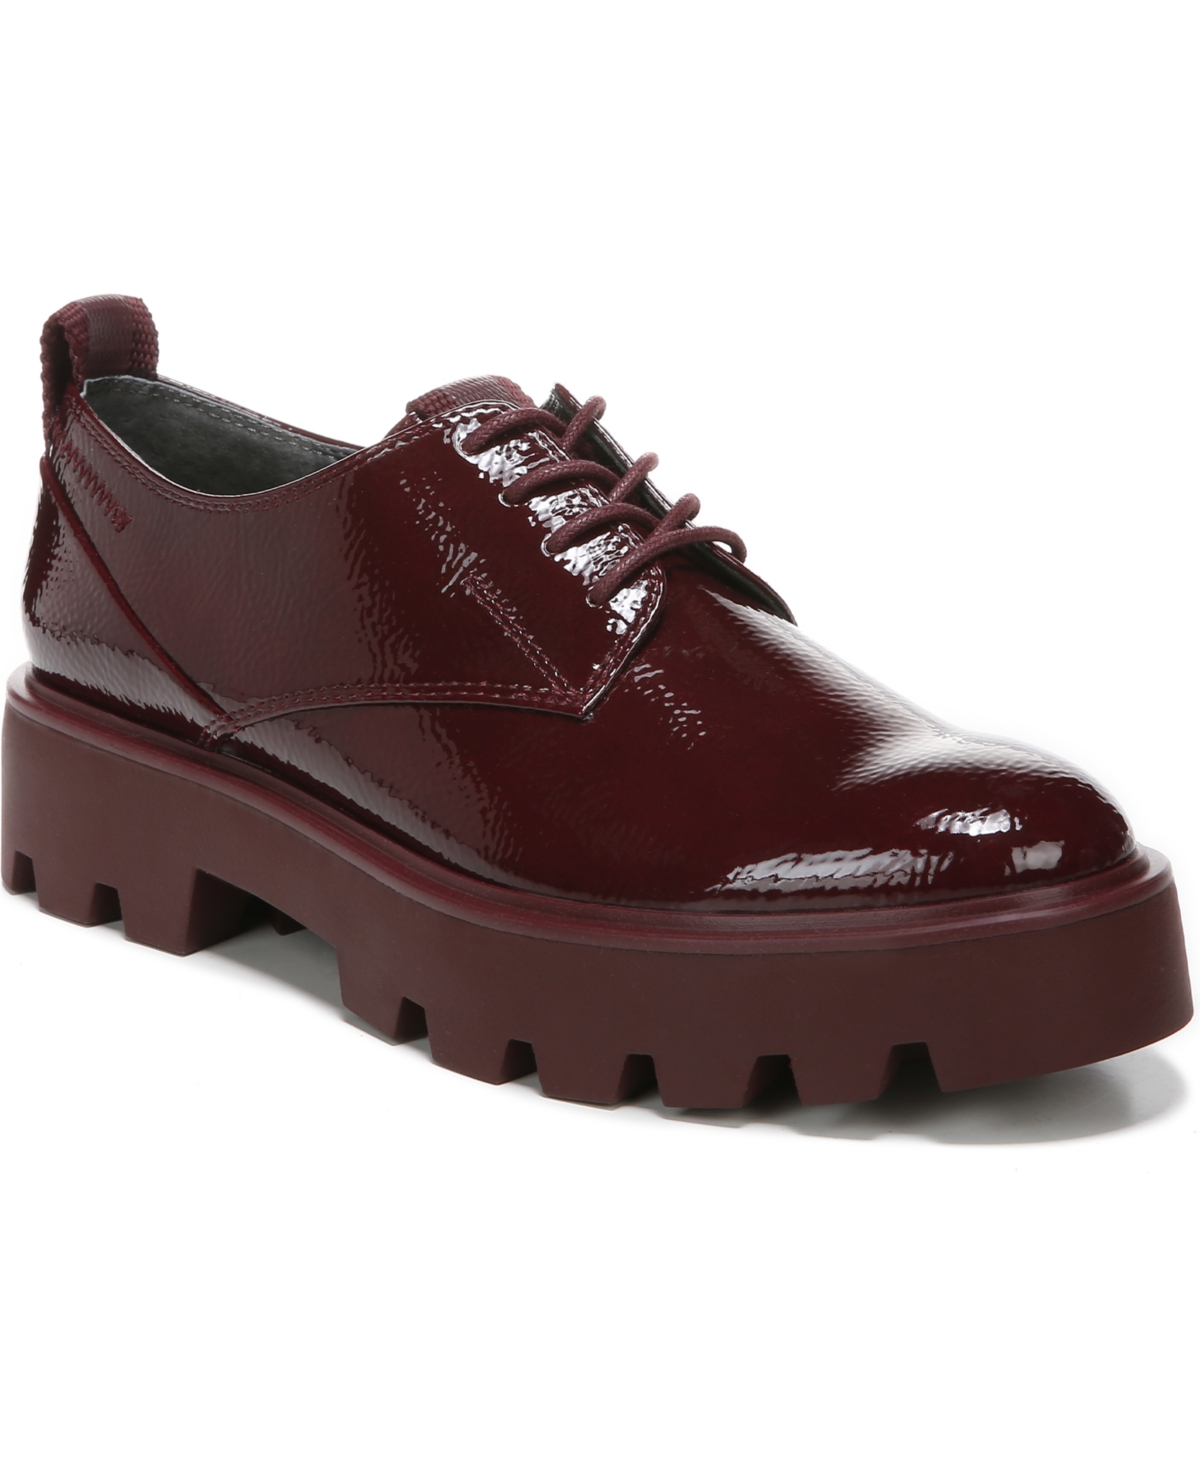 UPC 017138587624 product image for Franco Sarto Balin-Laced Lug Sole Oxfords Women's Shoes | upcitemdb.com